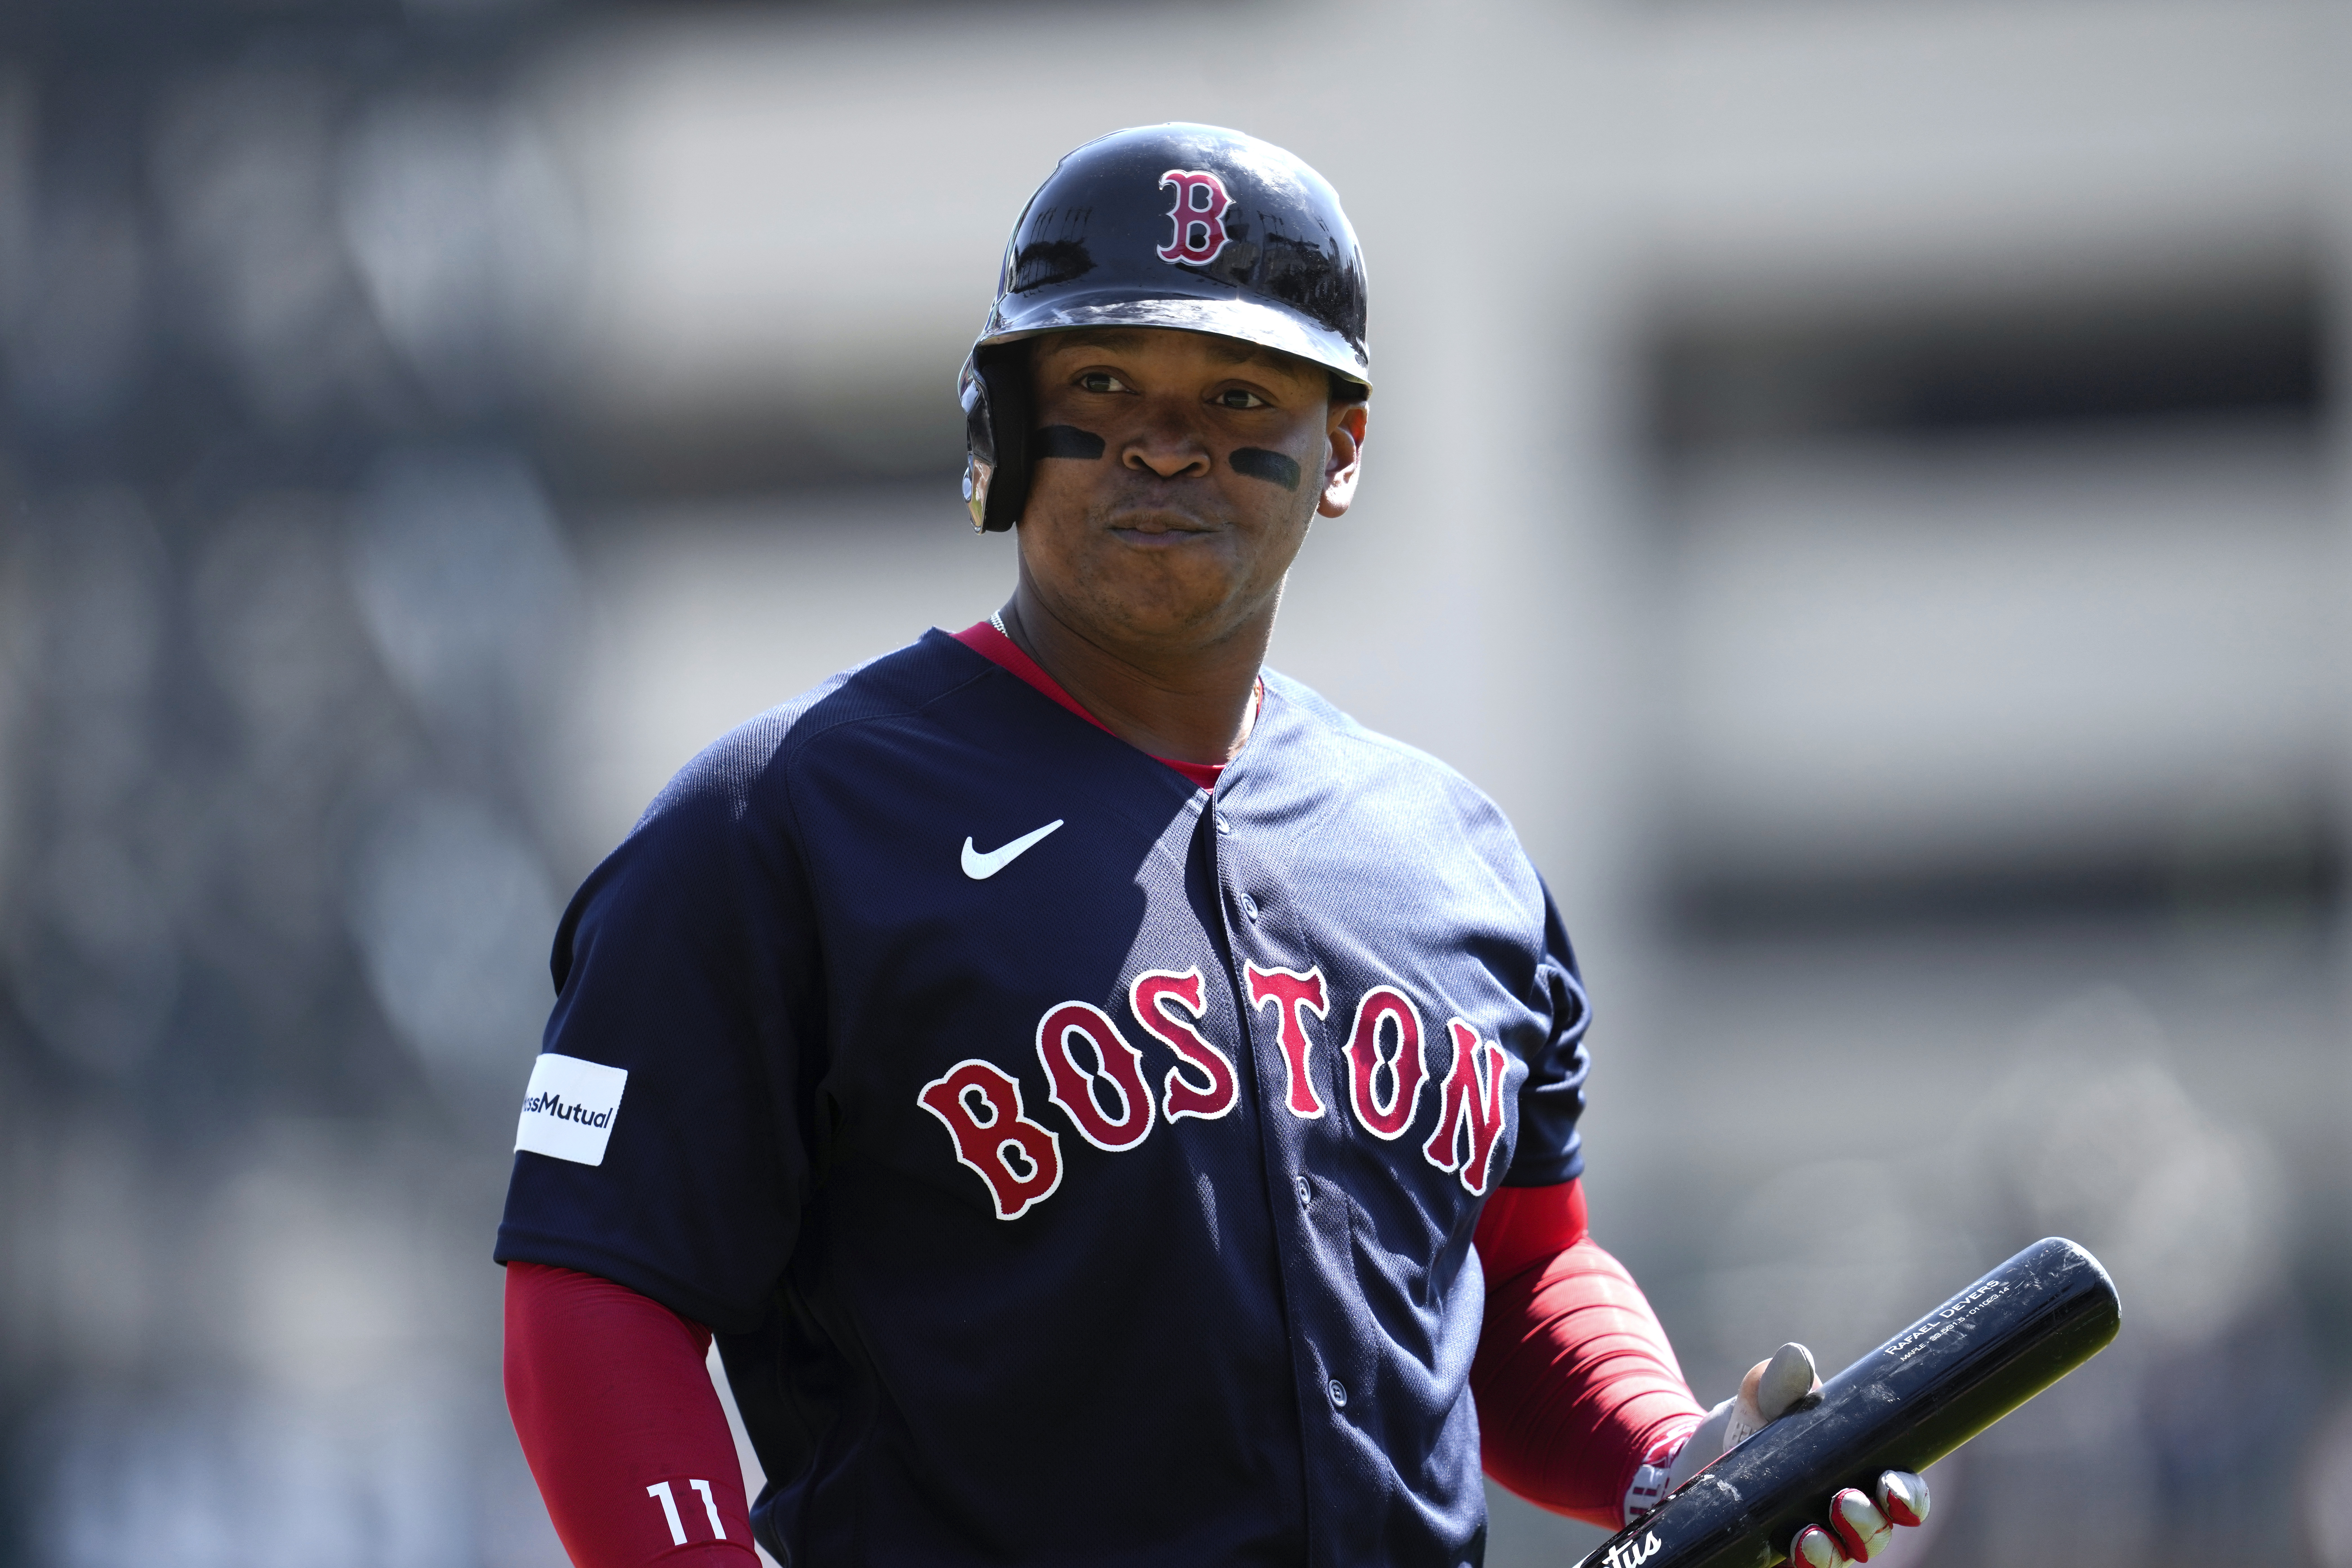 Rafael Devers struggles to sort out the error of his ways - The Boston Globe